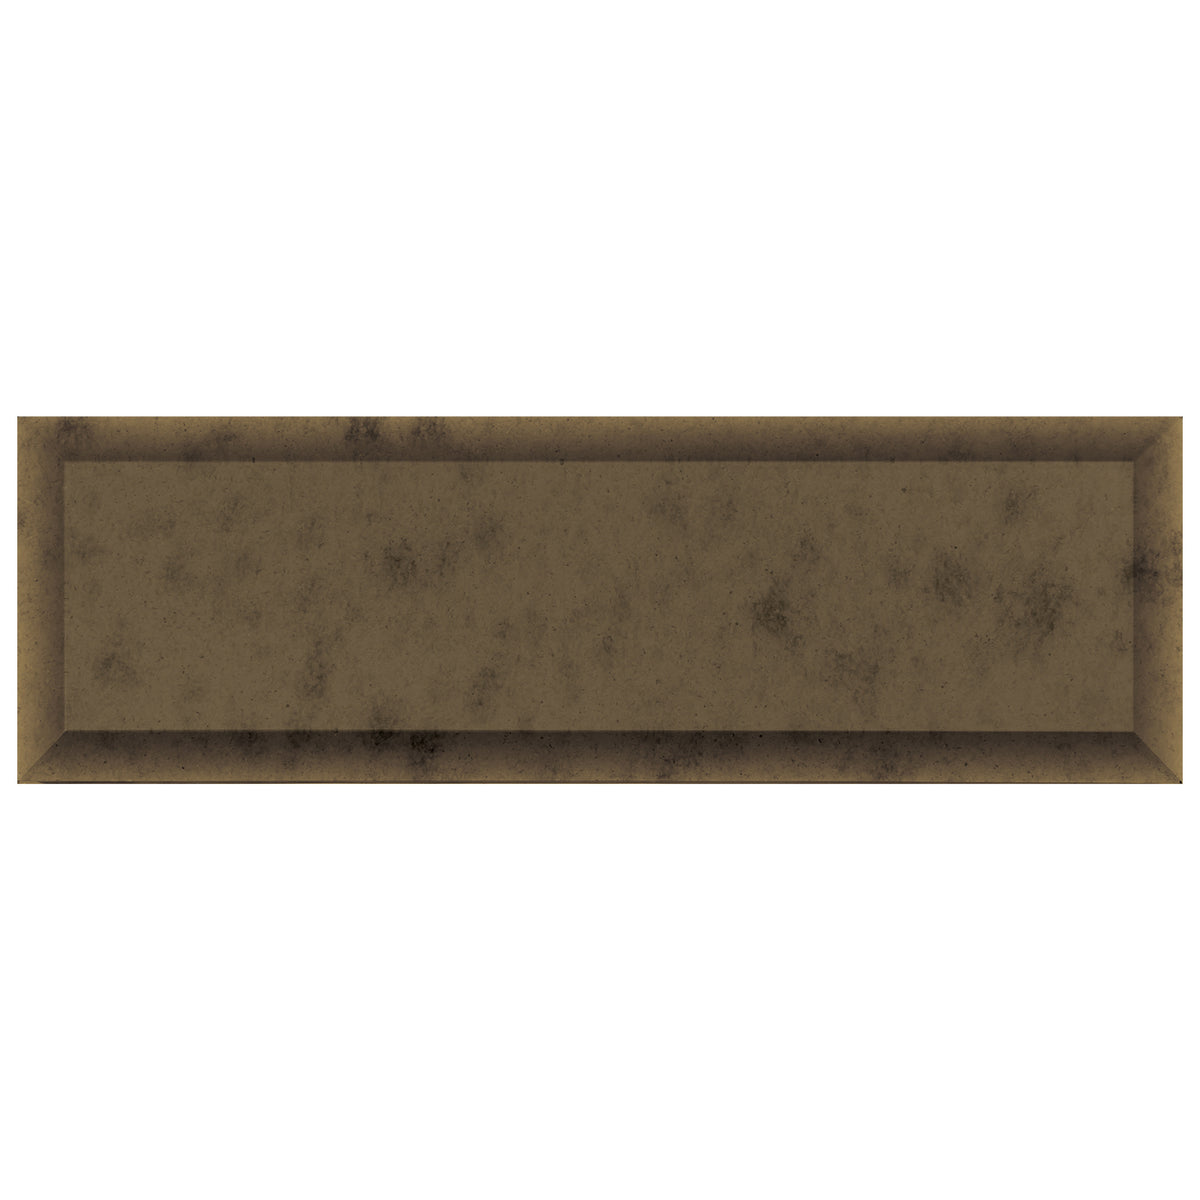 Anatolia - Obsidian - 3 in. x 9 in. Beveled Glass Wall Tile - Antique Bronze